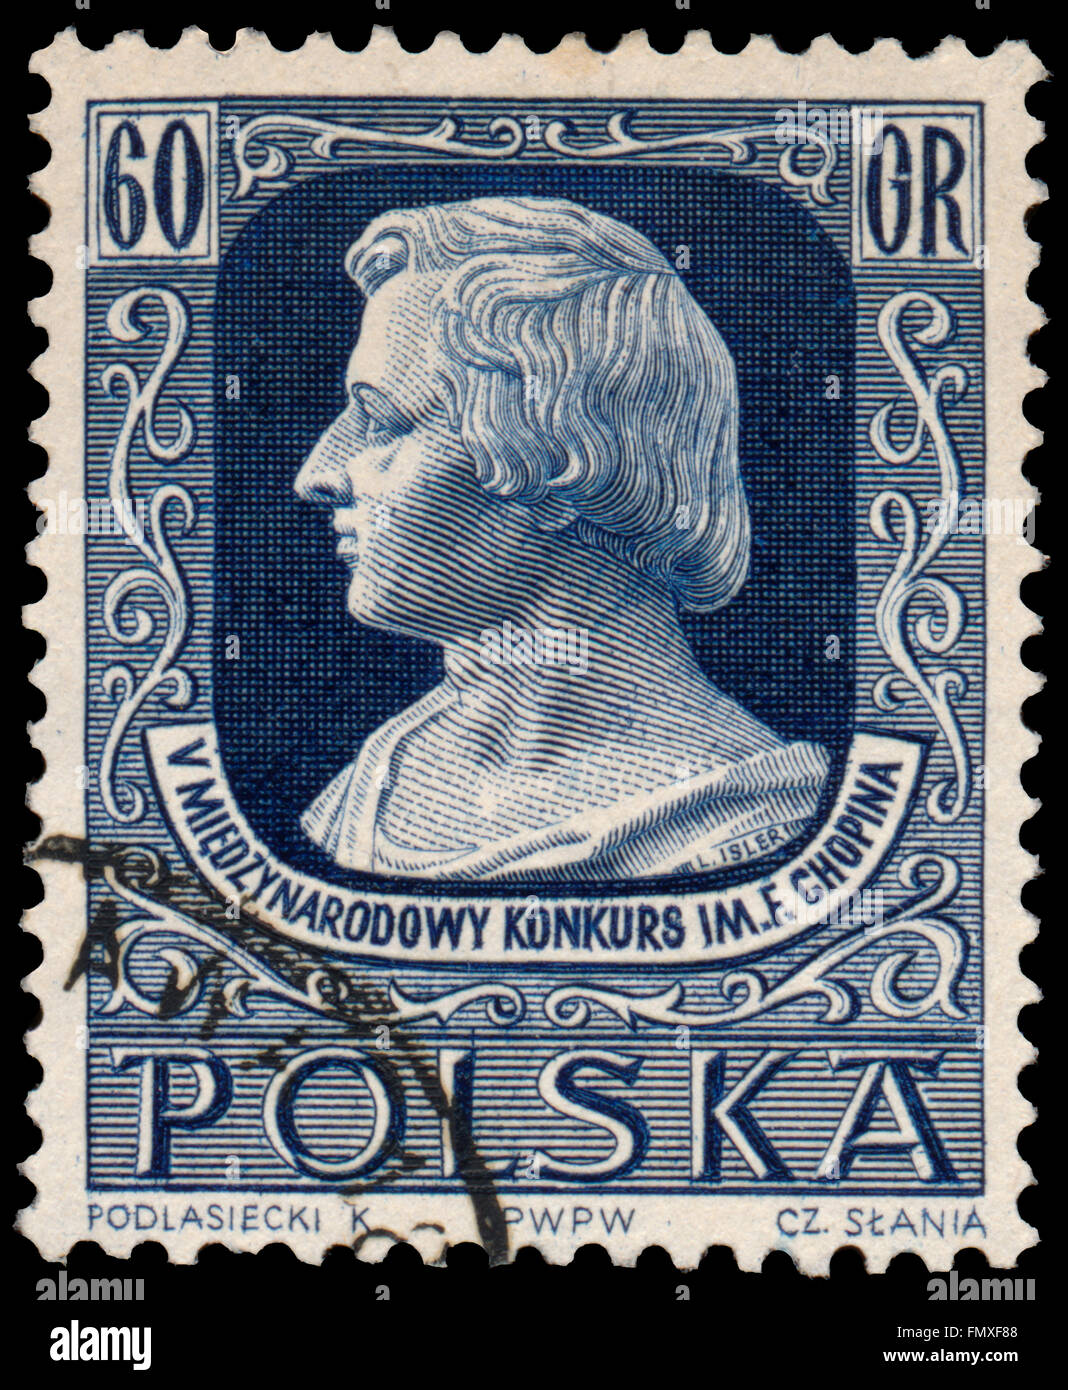 BUDAPEST, HUNGARY - 12 march 2016: a stamp printed by Poland shows image portrait of famous Polish musician and composer Frederi Stock Photo